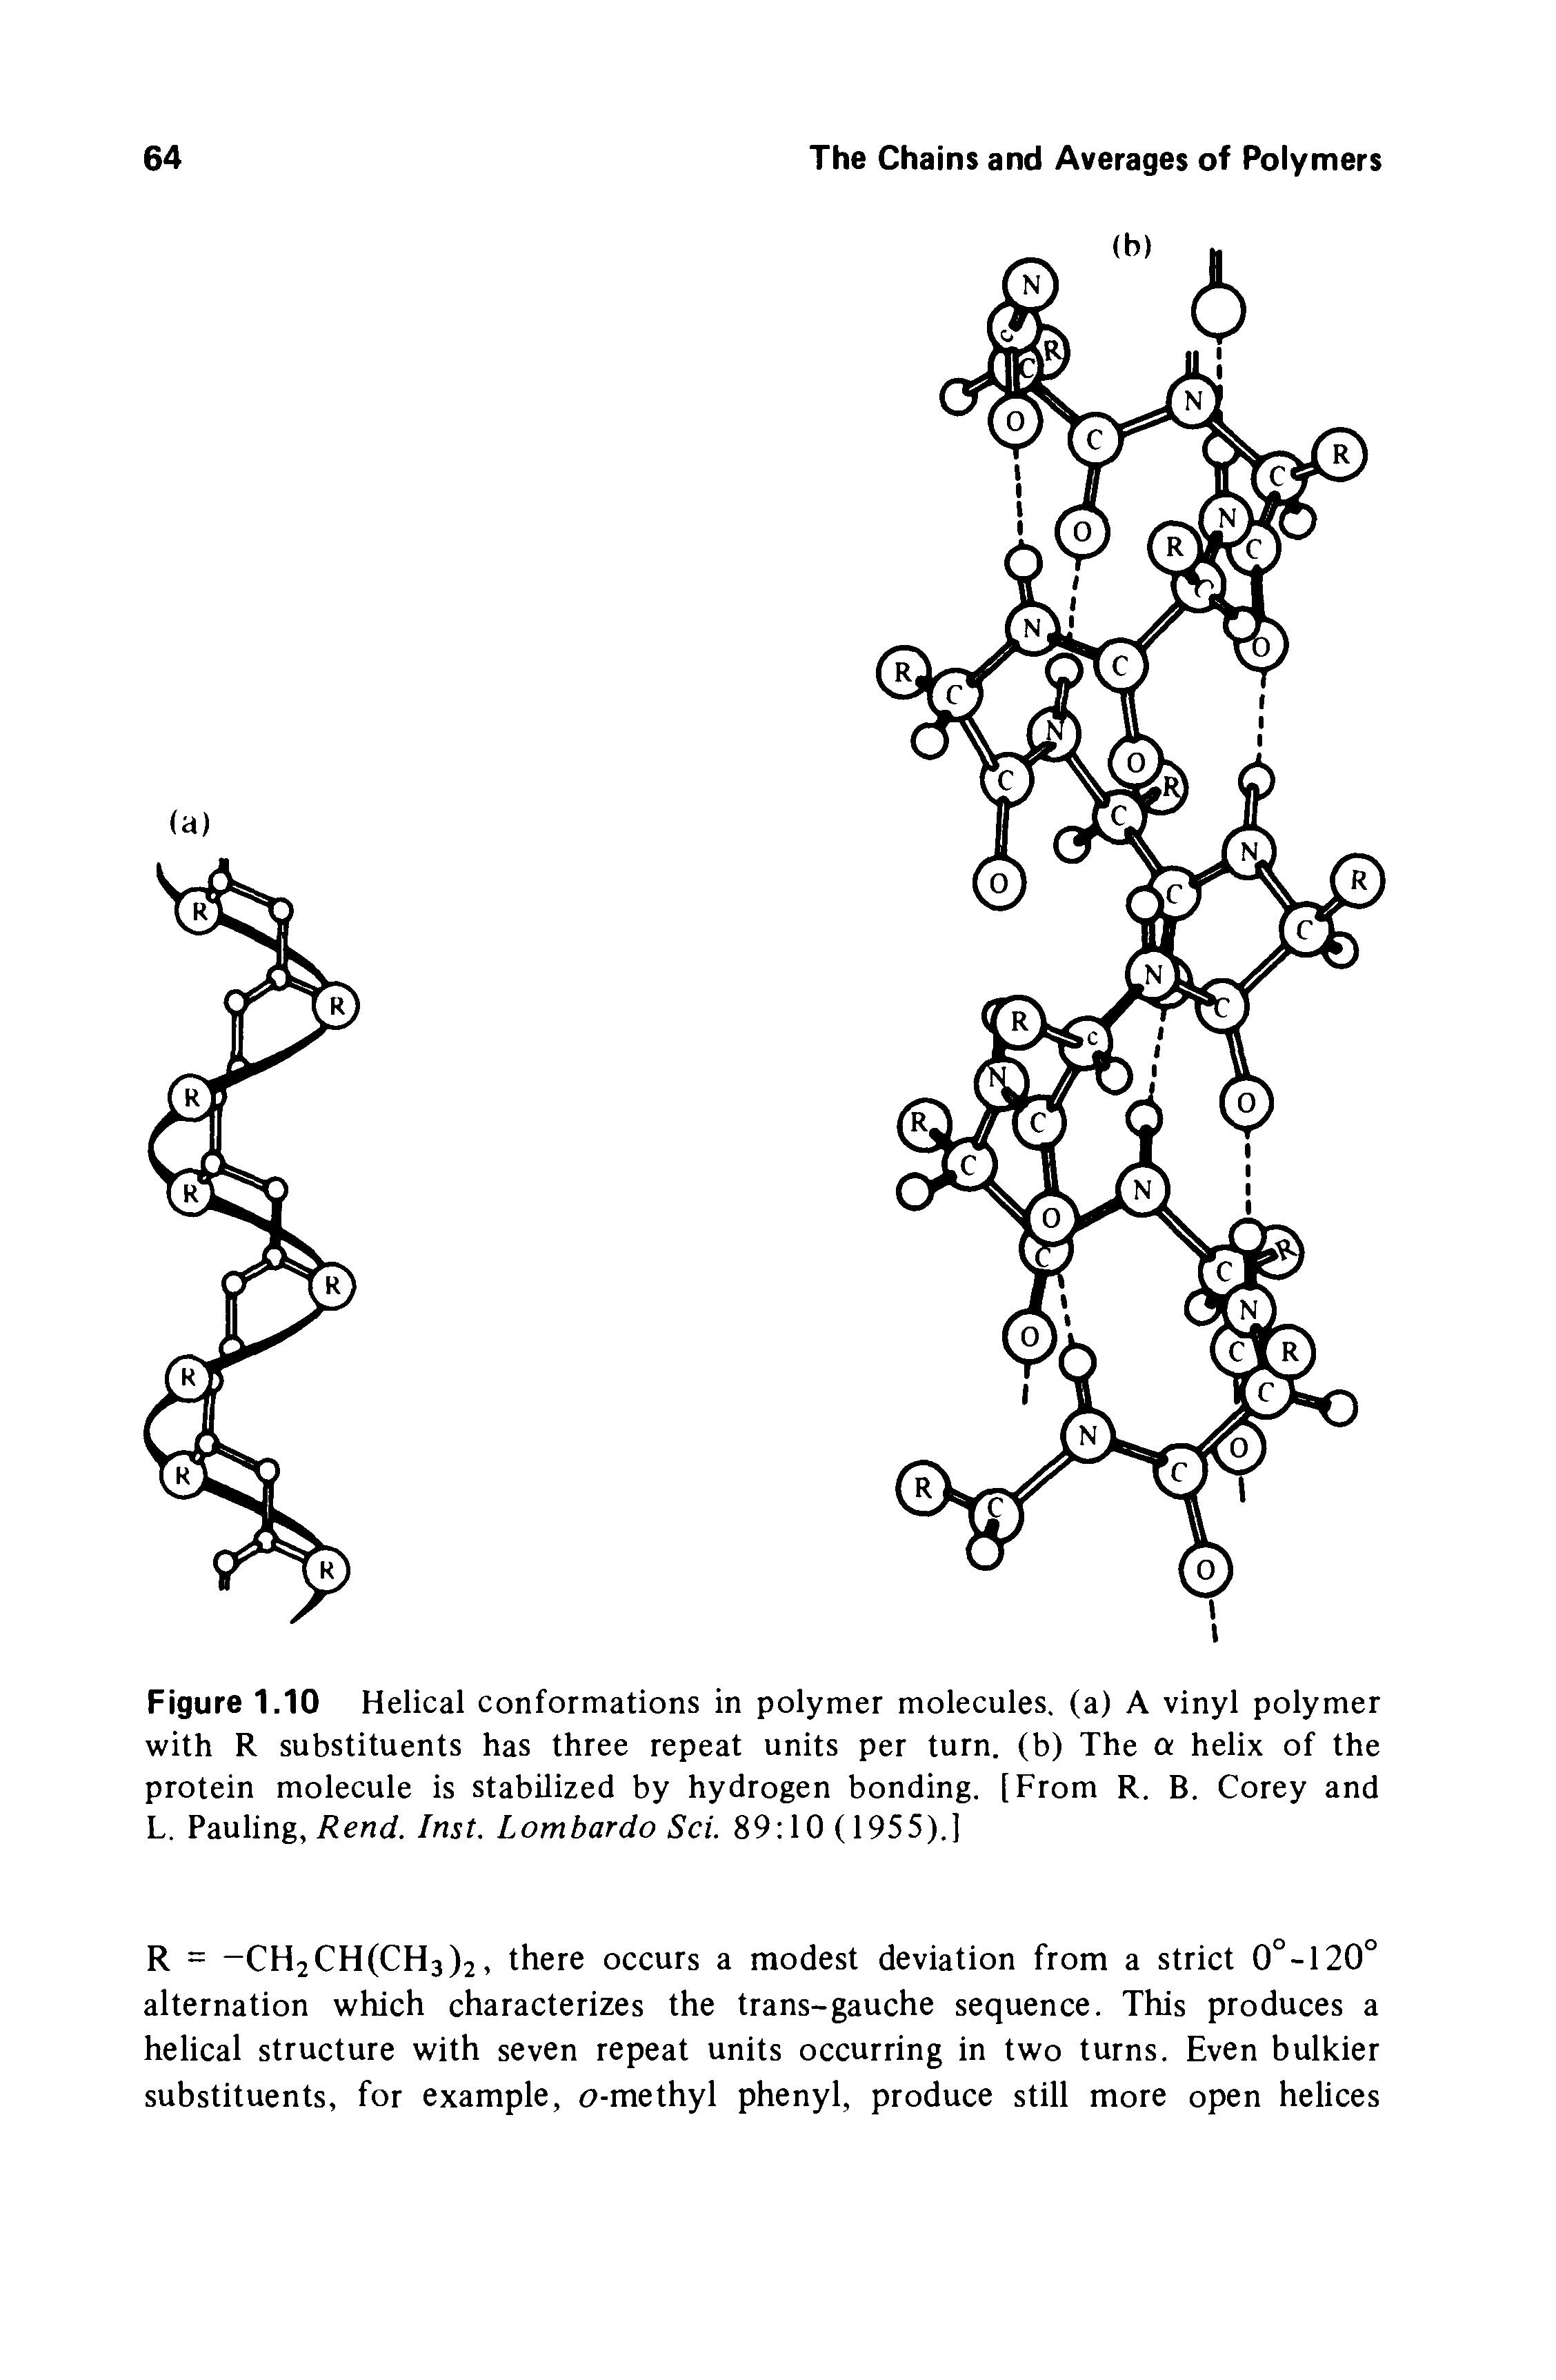 Figure 1.10 Helical conformations in polymer molecules, (a) A vinyl polymer with R substituents has three repeat units per turn, (b) The a helix of the protein molecule is stabilized by hydrogen bonding. [From R. B. Corey and L. Pauling,/ end. Inst. Lombardo Sci. 89 10 (1955).]...